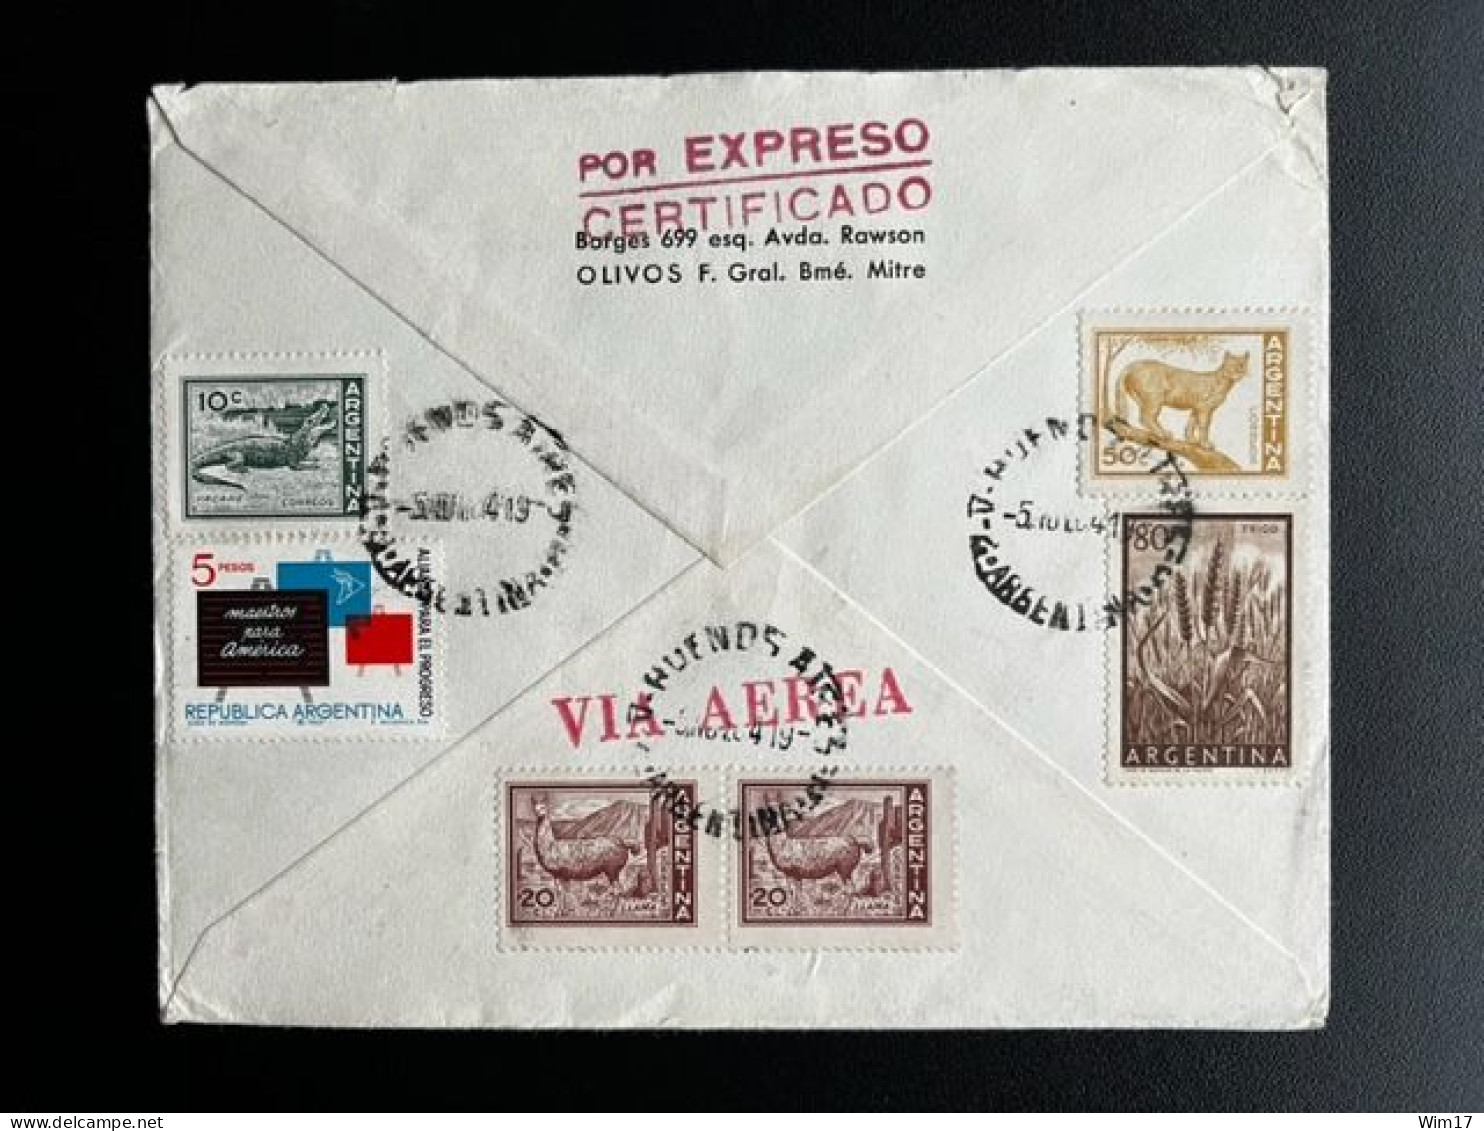 ARGENTINA 1964 REGISTERED EXPRESS AIR MAIL LETTER BUENOS AIRES TO WINTERMOOR 05-11-1964 CERTIFICADO EXPRESO - Cartas & Documentos